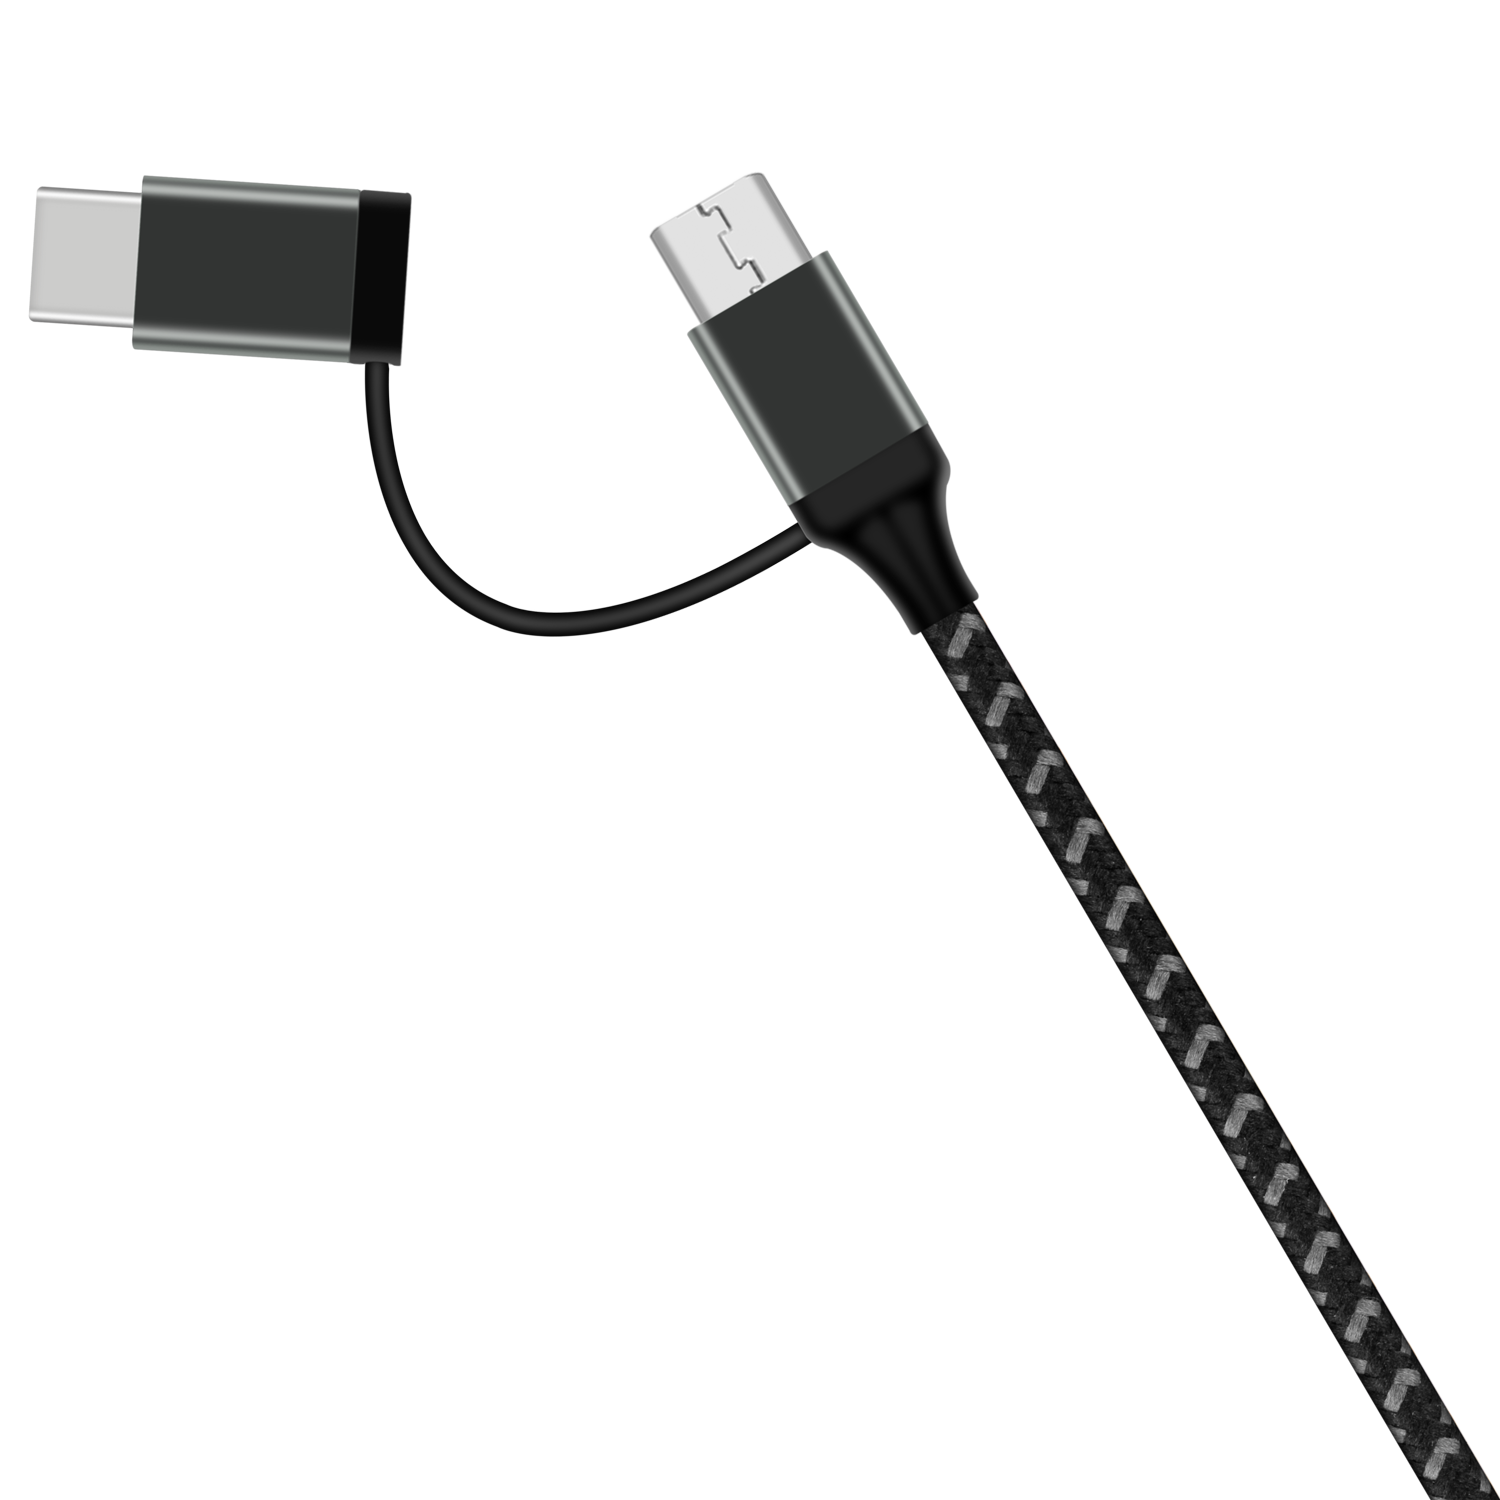 Zero 2-in-1 USB-C & Micro USB Cable Android (1M) DTC11